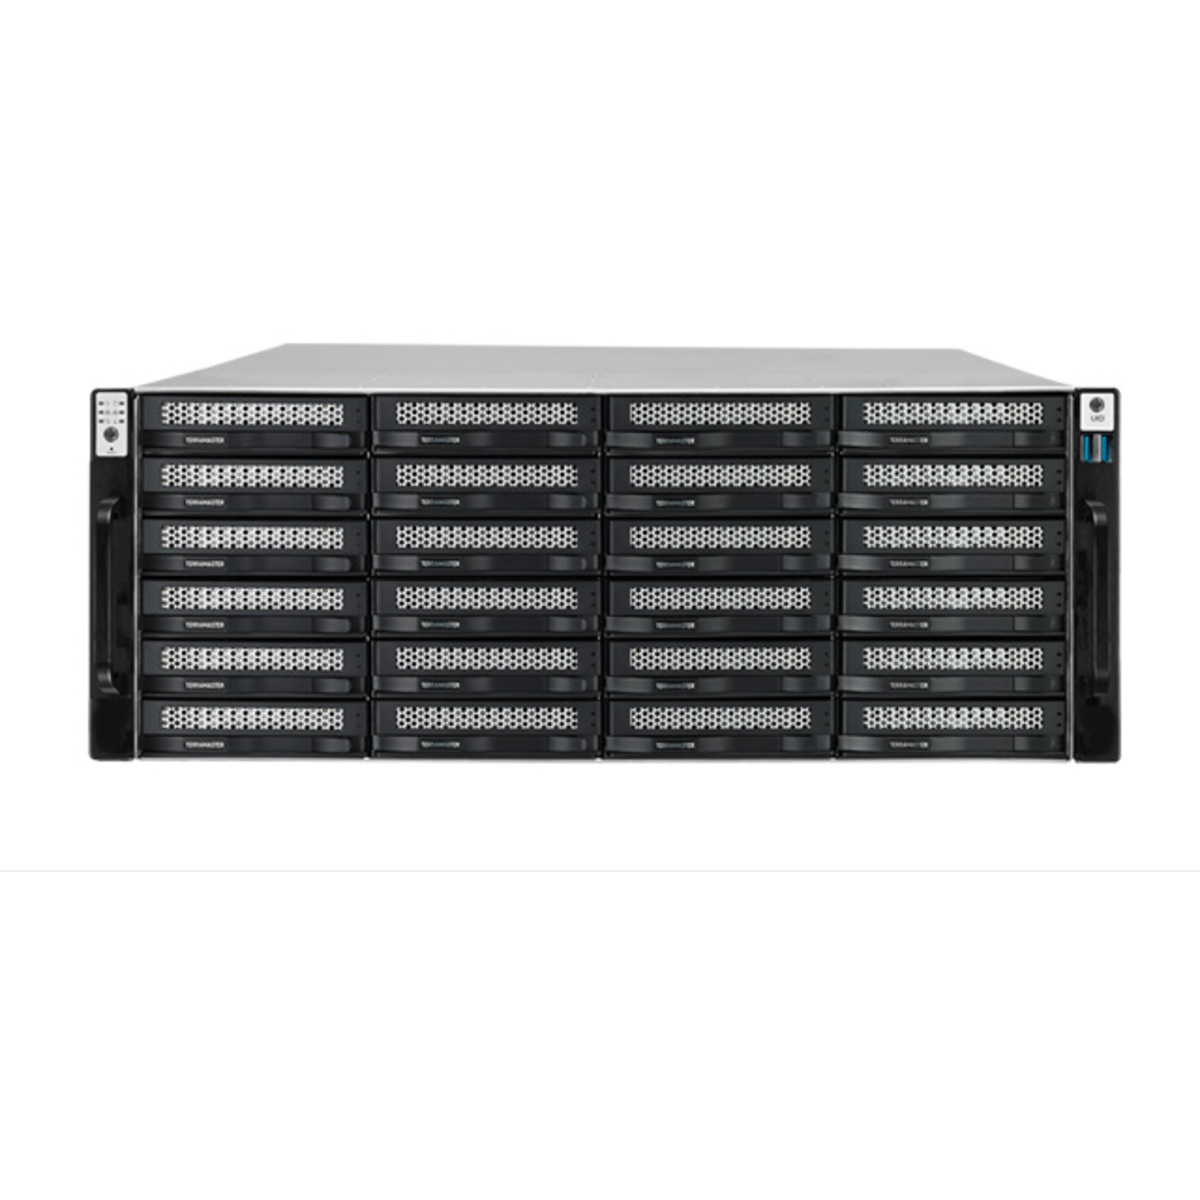 TerraMaster U24-722-2224 80tb 24-Bay RackMount Large Business / Enterprise NAS - Network Attached Storage Device 20x4tb Seagate IronWolf Pro ST4000NT001 3.5 7200rpm SATA 6Gb/s HDD NAS Class Drives Installed - Burn-In Tested U24-722-2224